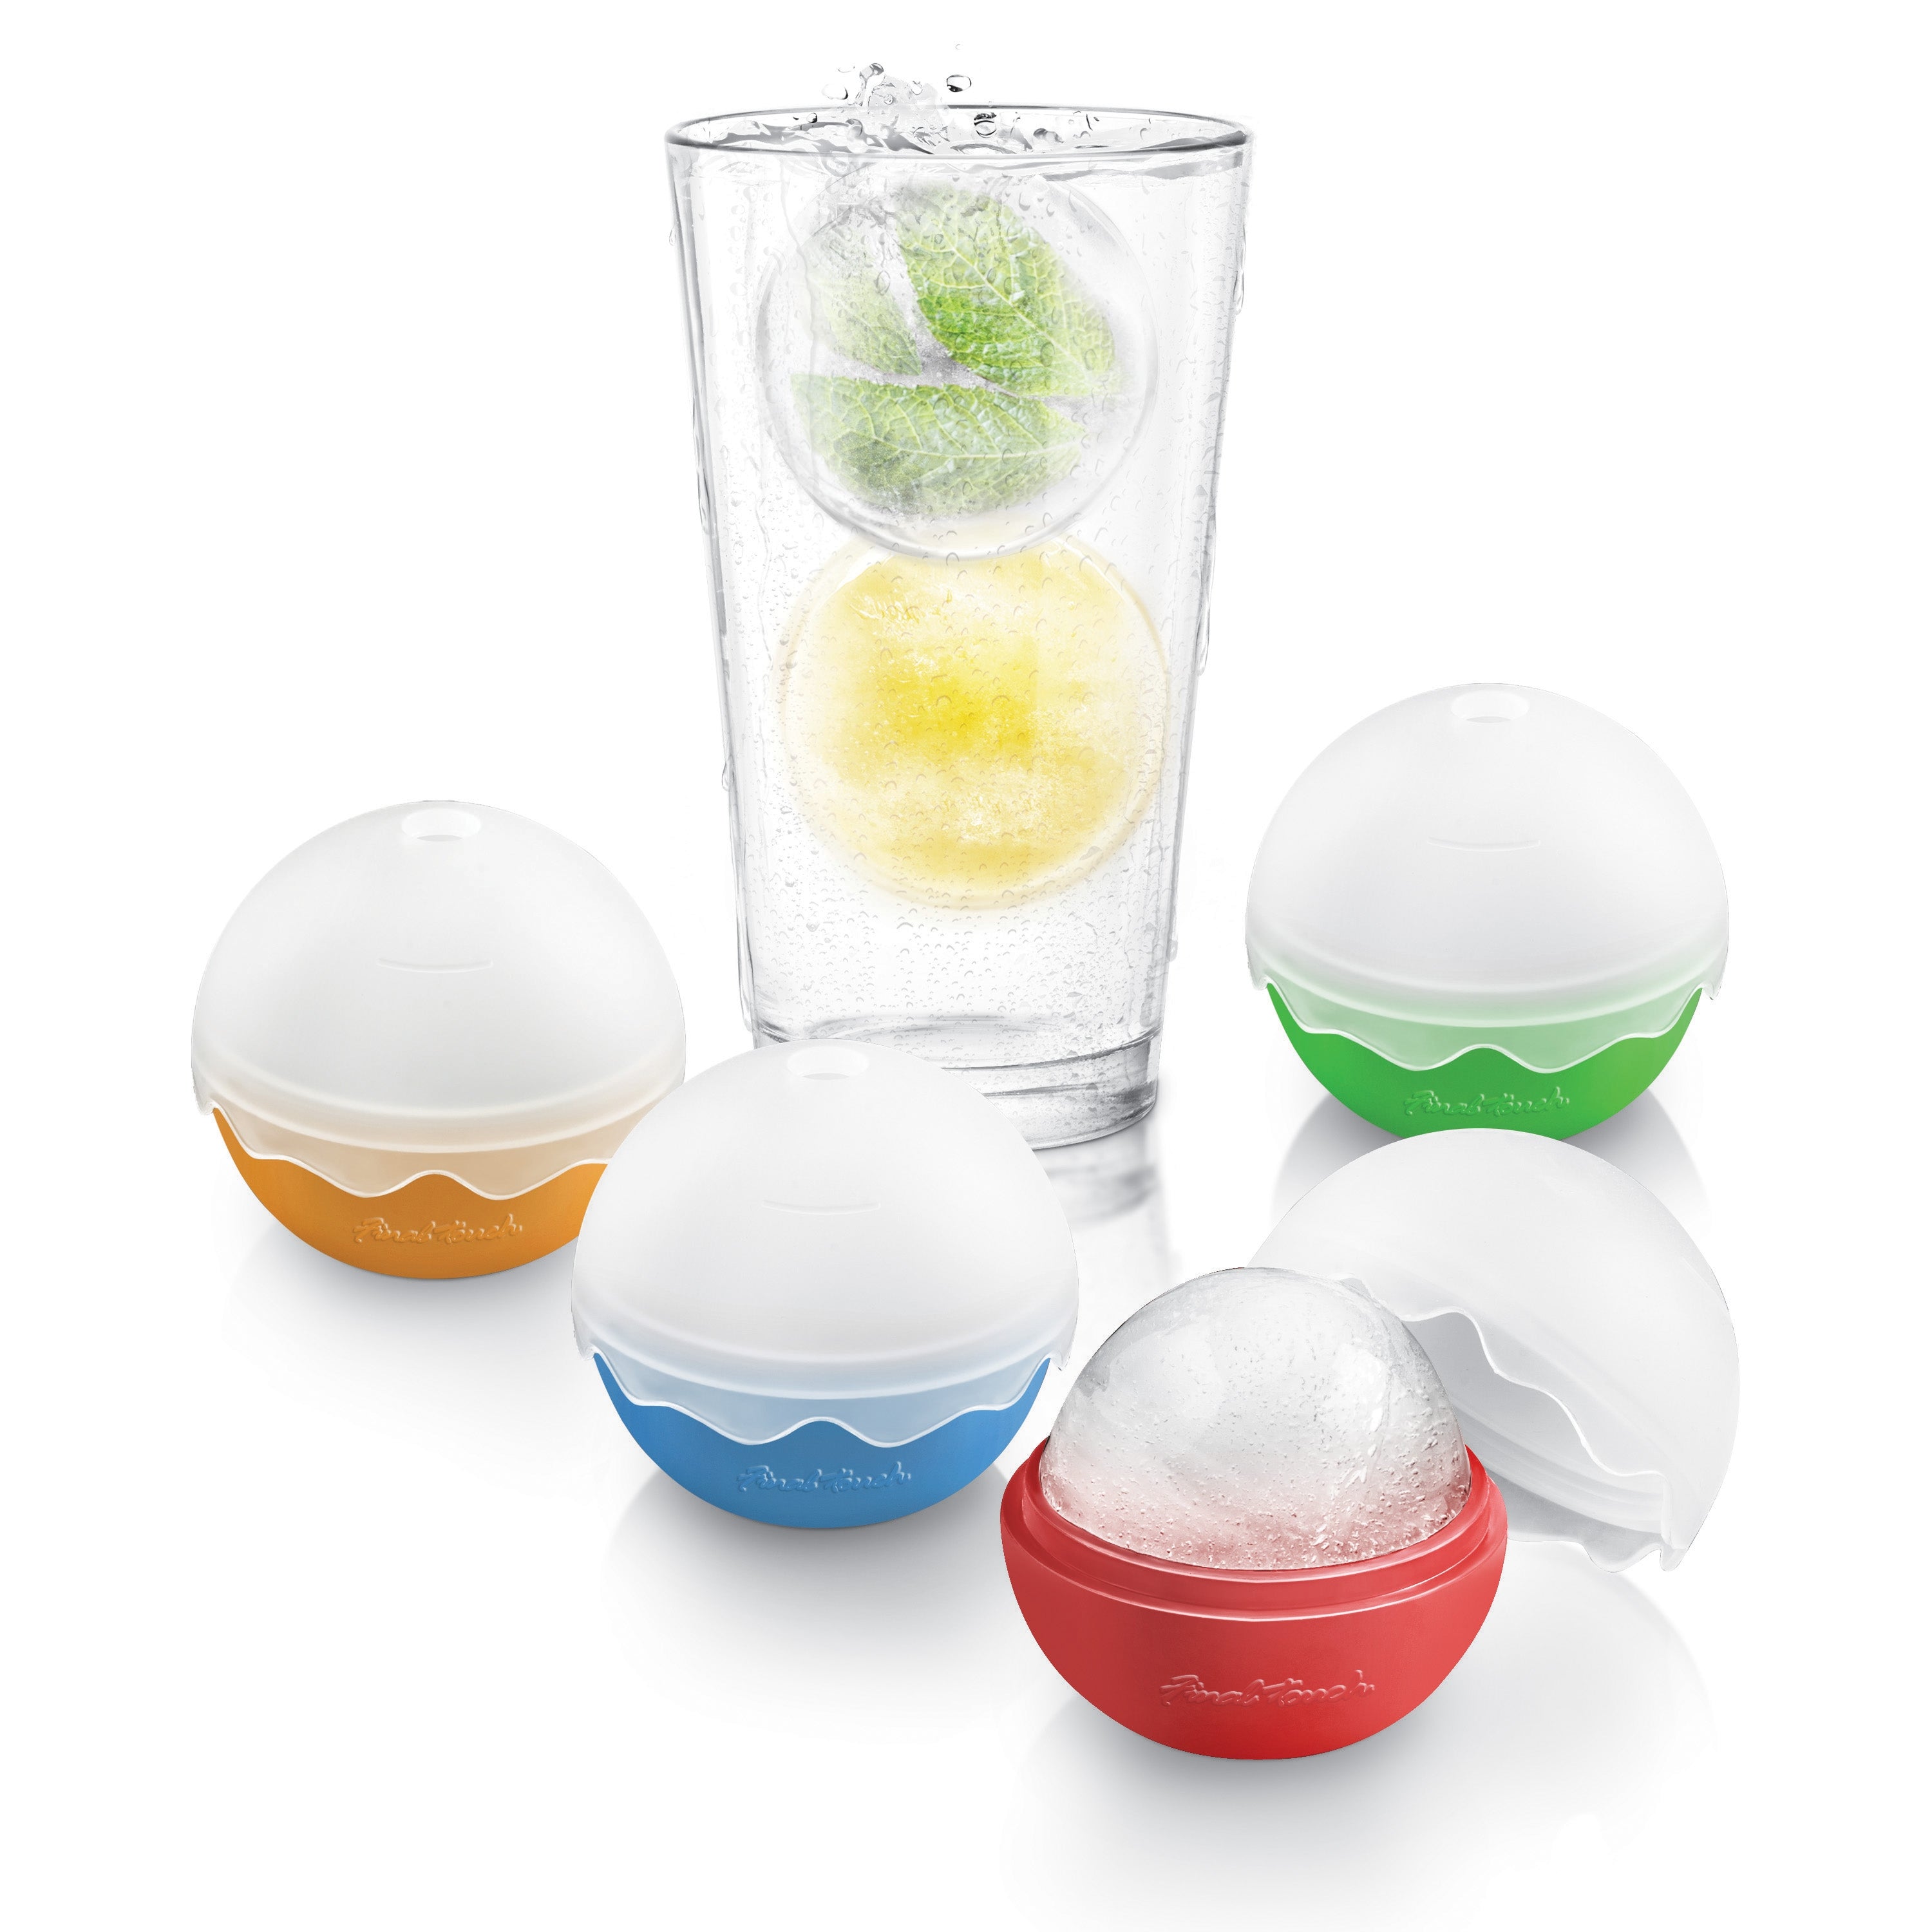 Silicone Ice Ball Mould to Make 6 Ice Balls